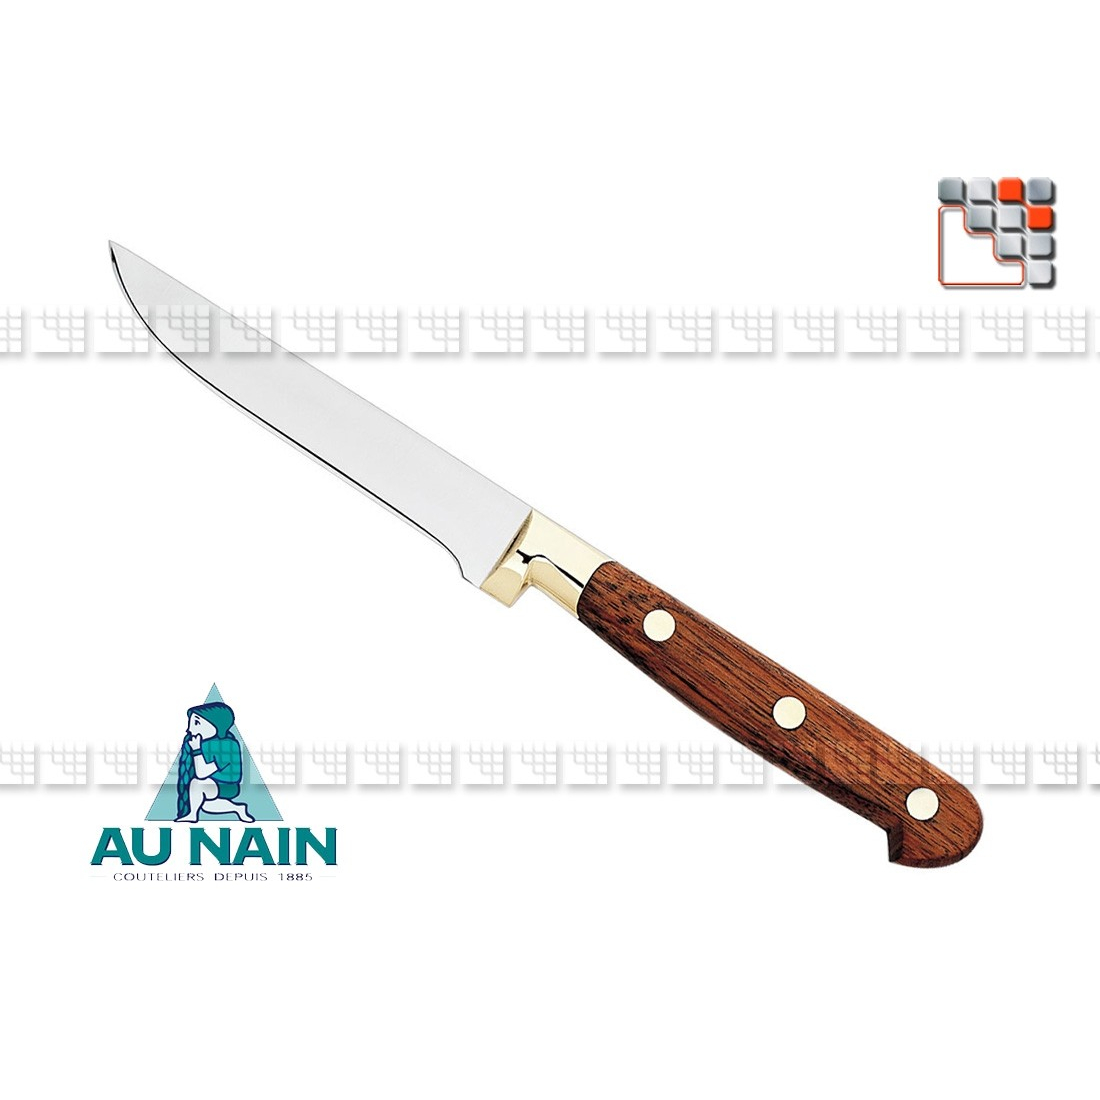 Shaped Boning Knife Rosewood 13 AUNAIN A38-1800501 AU NAIN® Coutellerie & Cutting